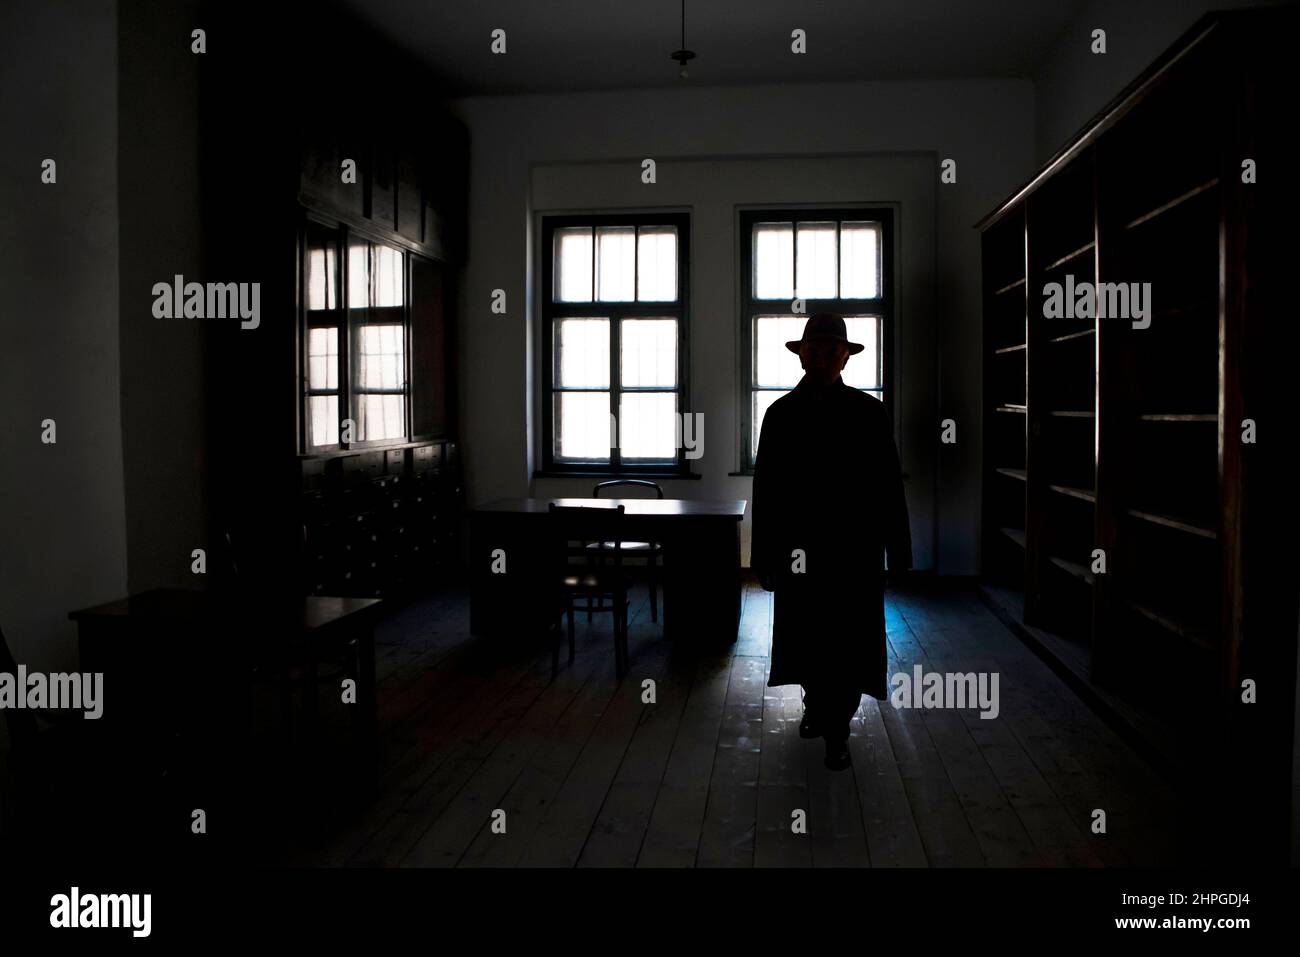 mysterious man in long coat and fedora hat, walking inside a dark room Stock Photo